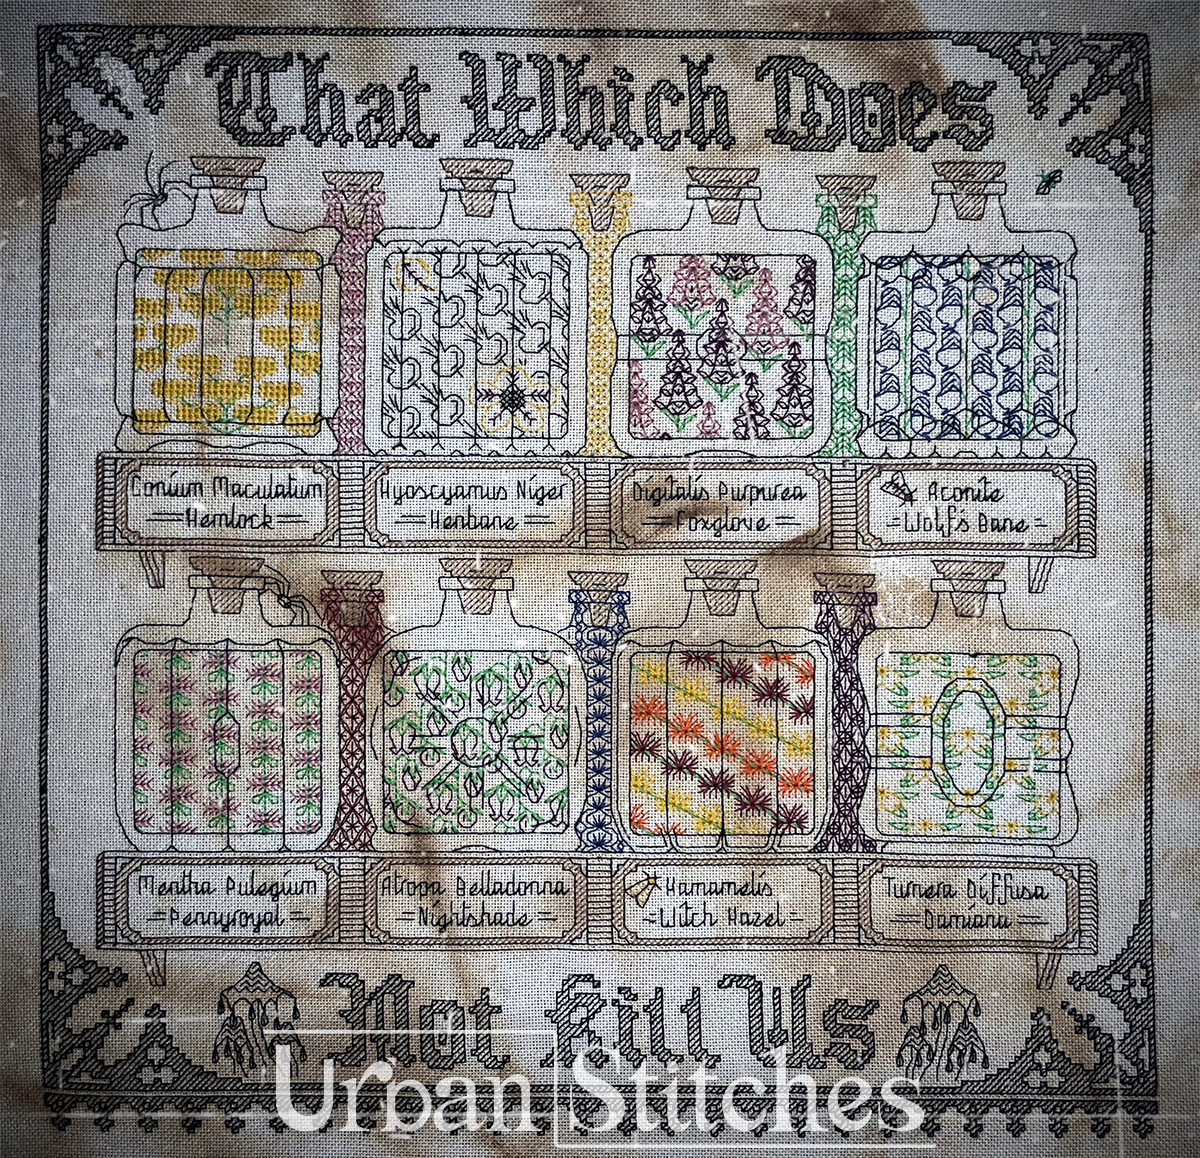 That Which Does Not Kill Us - Urban Stitches (stitch along) SAL - blackwork embroidery toxic plants Victorian gothic